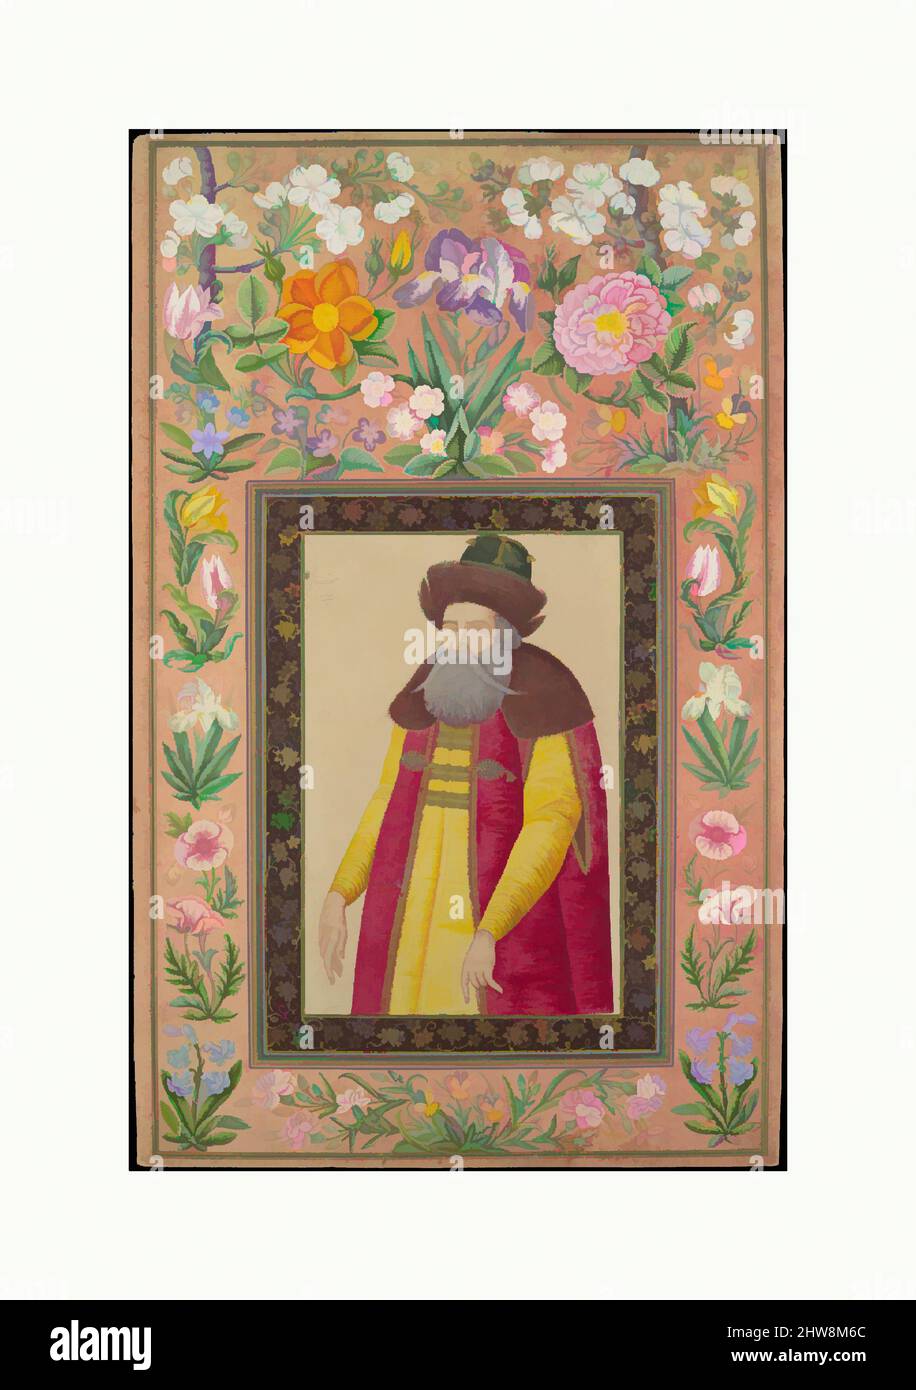 Art inspired by Portrait of the Russian Ambassador, Prince Andrey Priklonskiy', Folio from the Davis Album, A.H. 1048/A.D. 1673–74, Made in Iran, Ink, opaque watercolor, and gold on paper, Page: H. 13 1/8 in. (33.3 cm), Codices, Ali Quli Jabbadar (active 1642–late 17th century), This, Classic works modernized by Artotop with a splash of modernity. Shapes, color and value, eye-catching visual impact on art. Emotions through freedom of artworks in a contemporary way. A timeless message pursuing a wildly creative new direction. Artists turning to the digital medium and creating the Artotop NFT Stock Photo